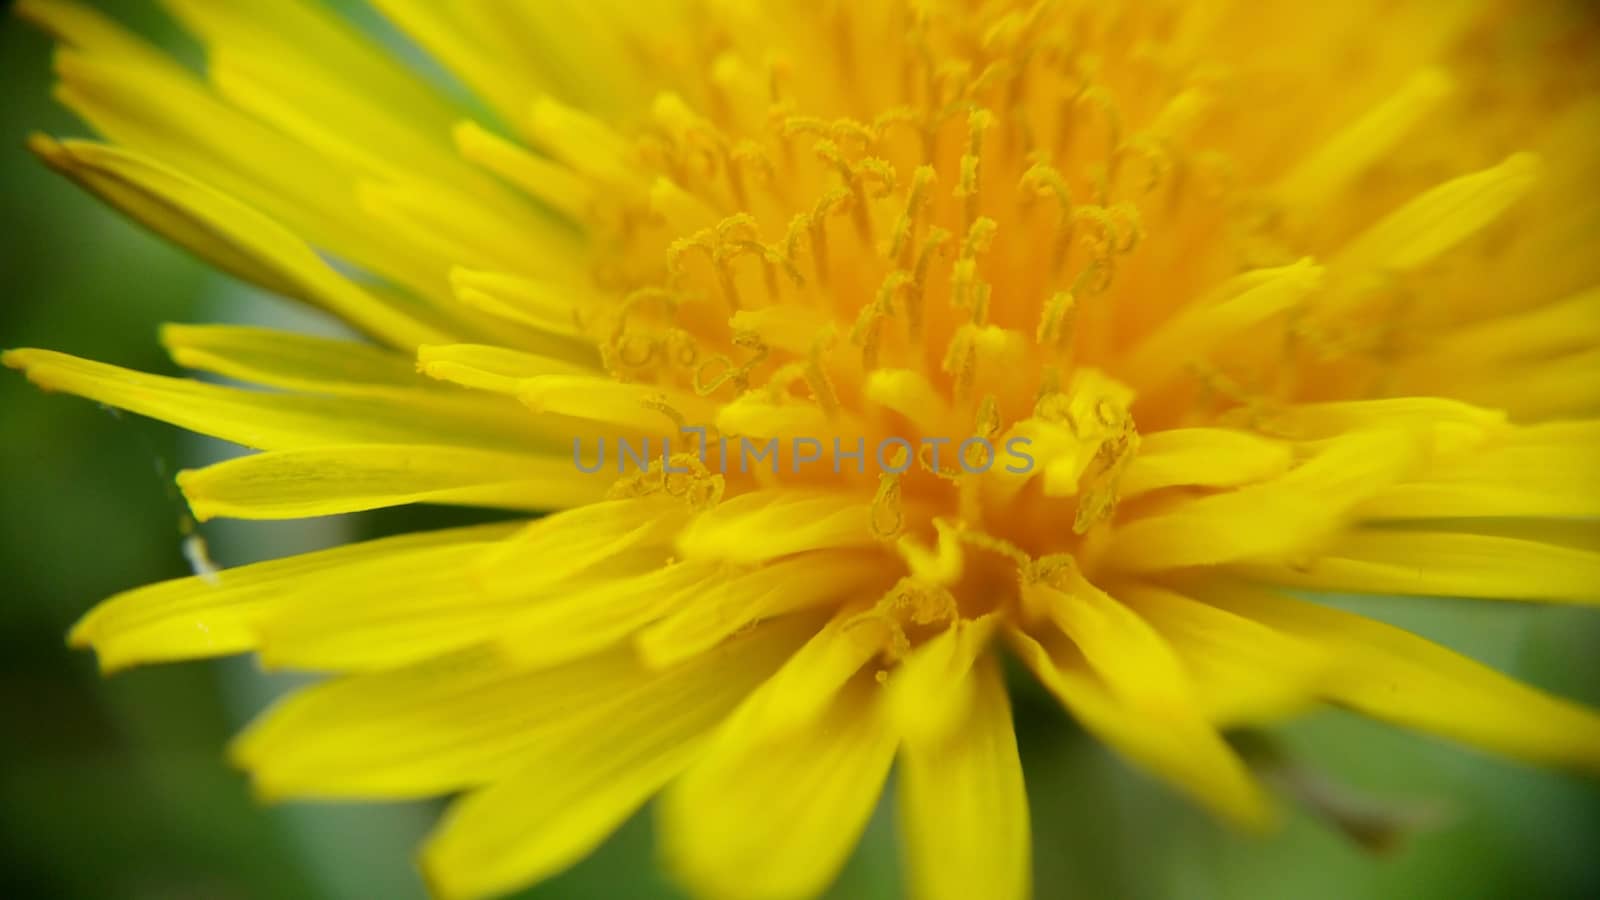 Yellow dandelion in natural environment, macrophoto with shallow depth of field